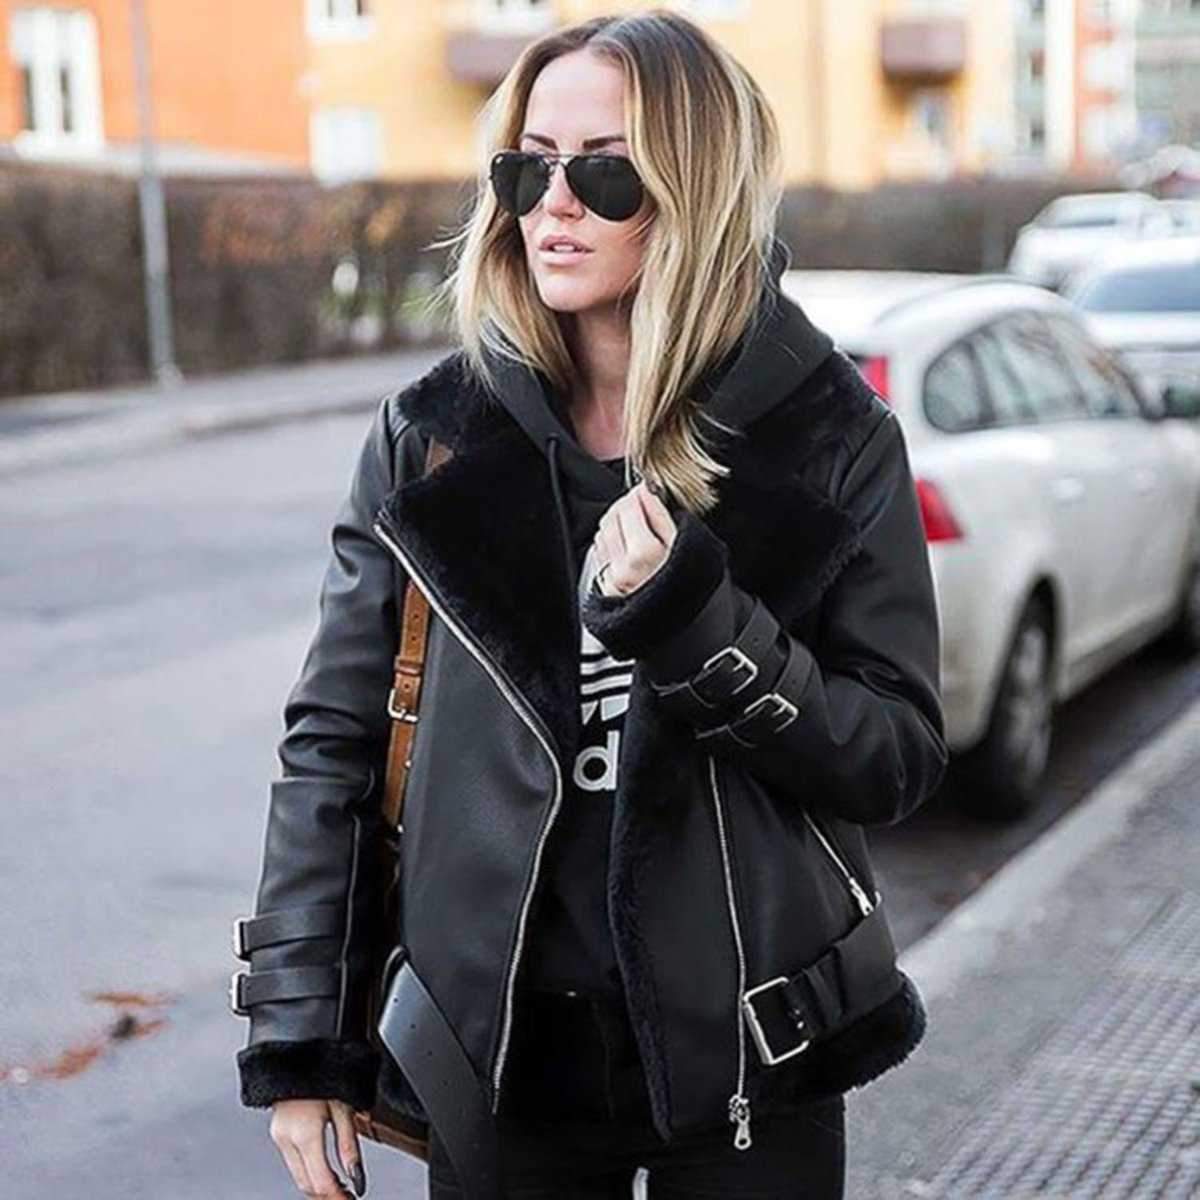 Faux Fur Lined Leather Shearling Moto Jacket on sale - SOUISEE